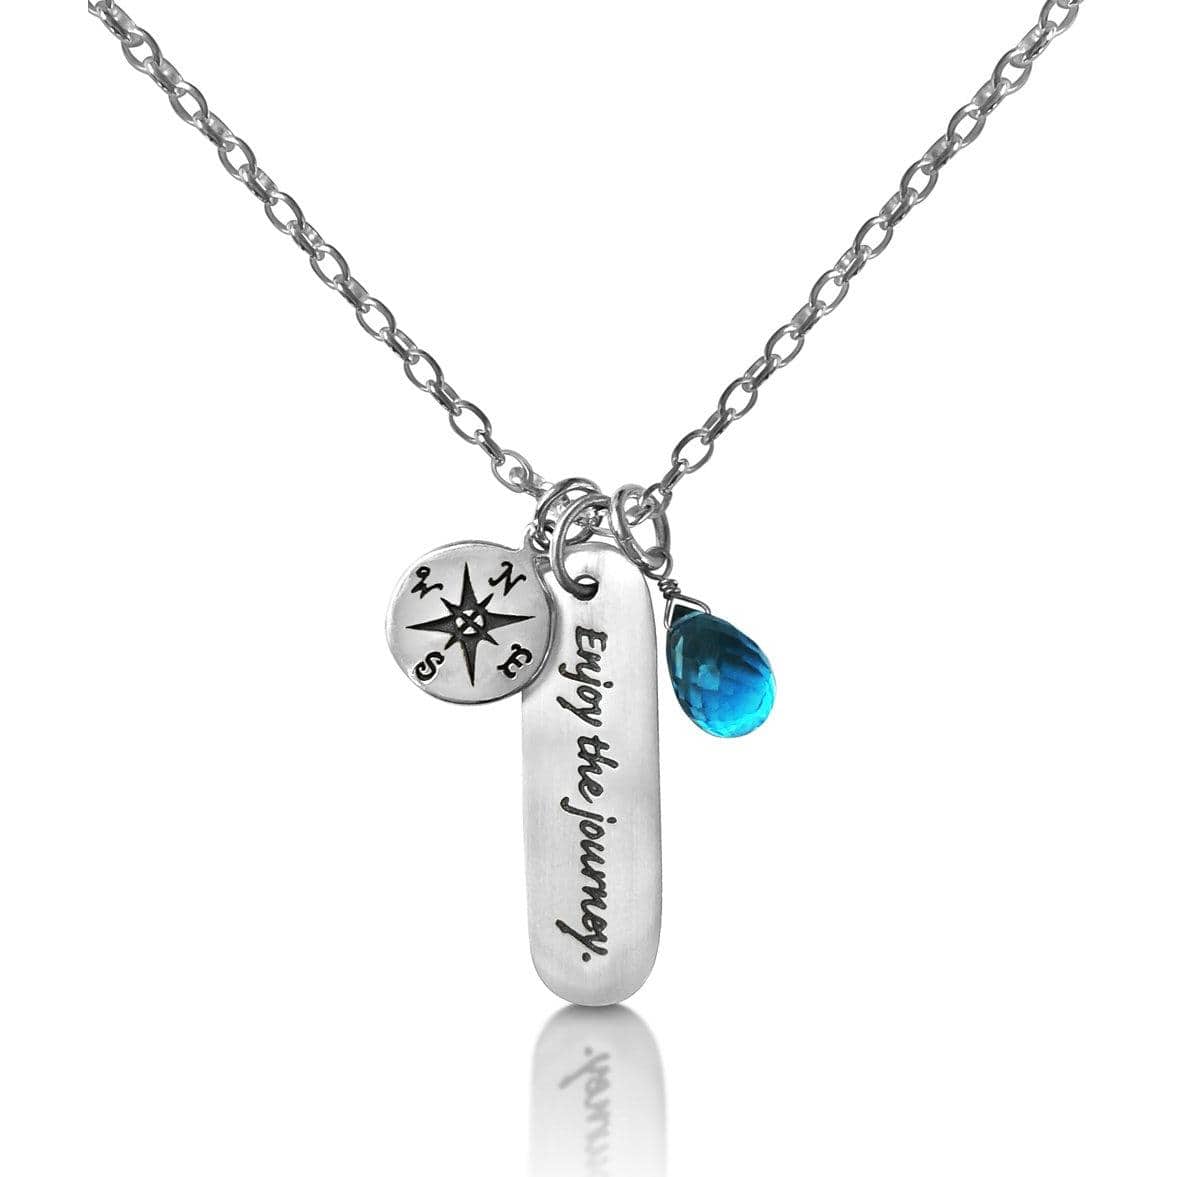 Sterling Silver Enjoy the Journey Inspirational Globe Trotter Quote Necklace with a Compass Charm